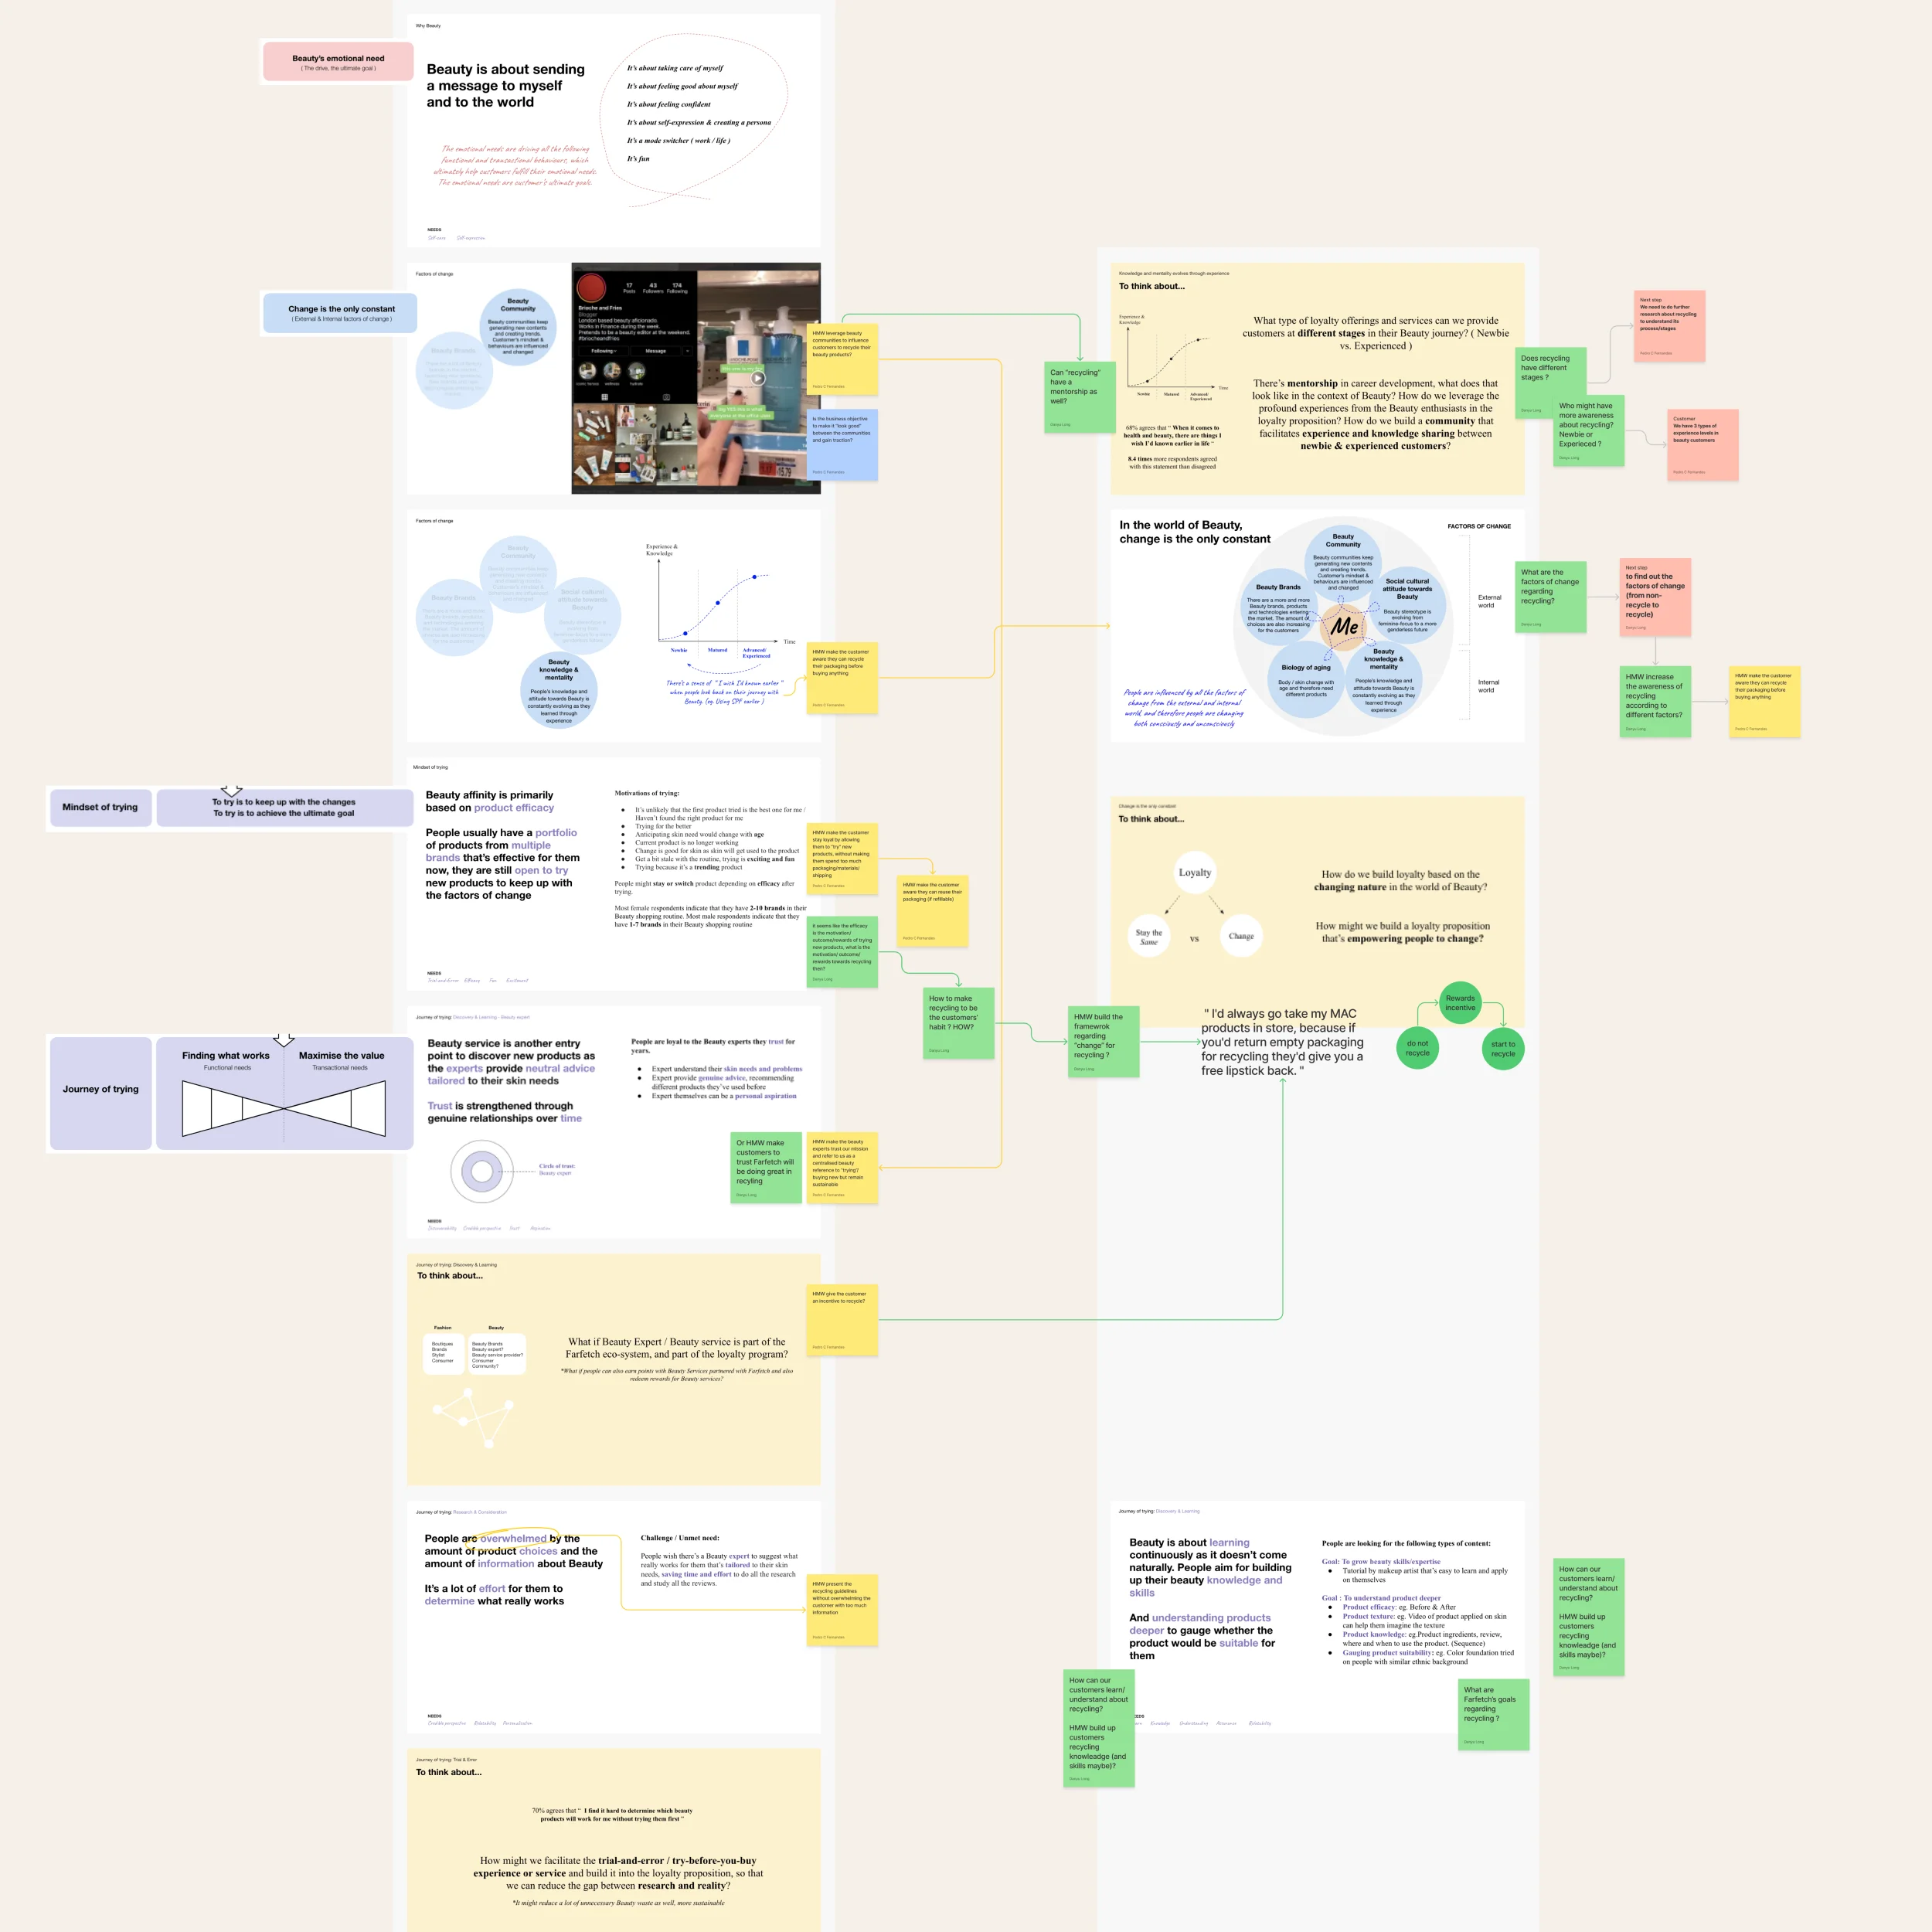 Screenshot of a digital whiteboard with a collage of presentation slides overlapped with post-it annotations.